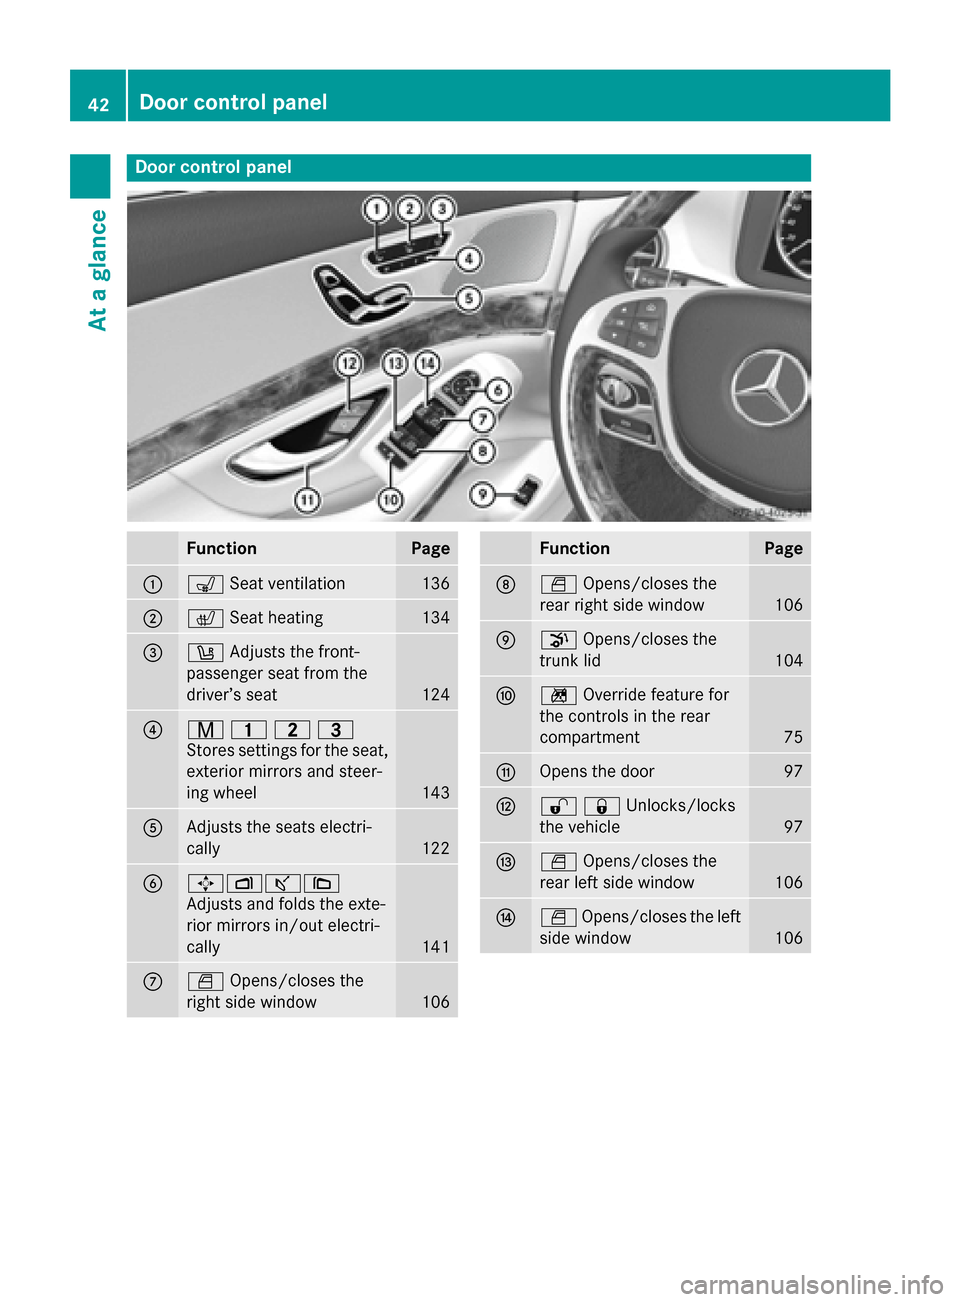 MERCEDES-BENZ S-Class 2015 W222 Service Manual Door control panel
Function Page
:
s
Seat ventilation 136
;
c
Seat heating 134
=
w
Adjusts the front-
passenger seat from the
driver’s seat 124
?
r
45=
Stores settings for the seat, exterior mirrors